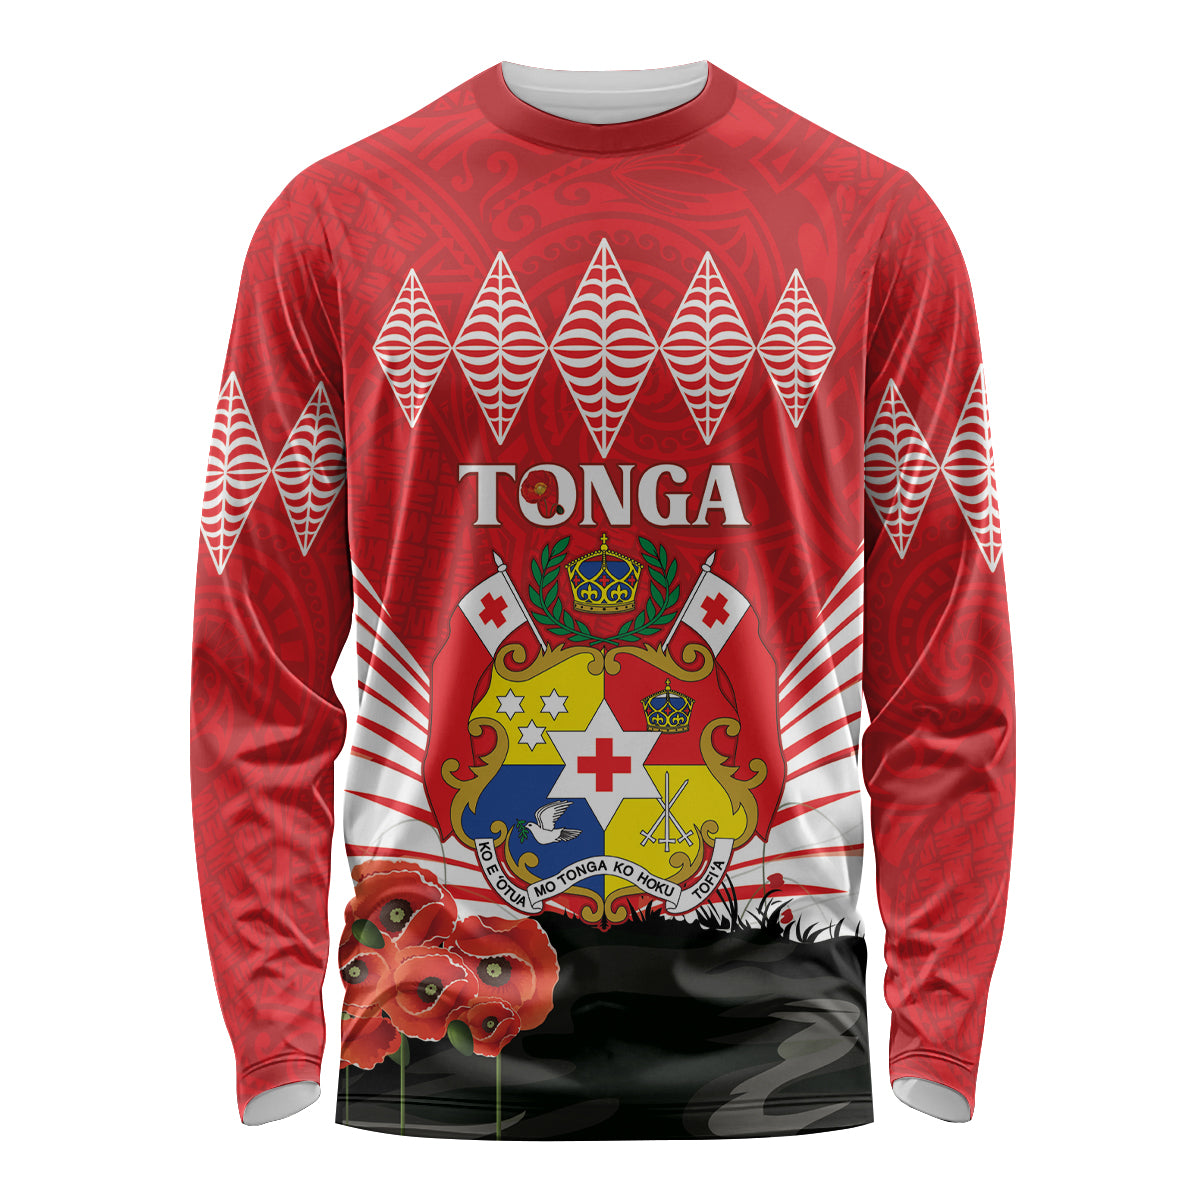 Tonga ANZAC Day Long Sleeve Shirt Camouflage With Poppies Lest We Forget LT14 Unisex Red - Polynesian Pride